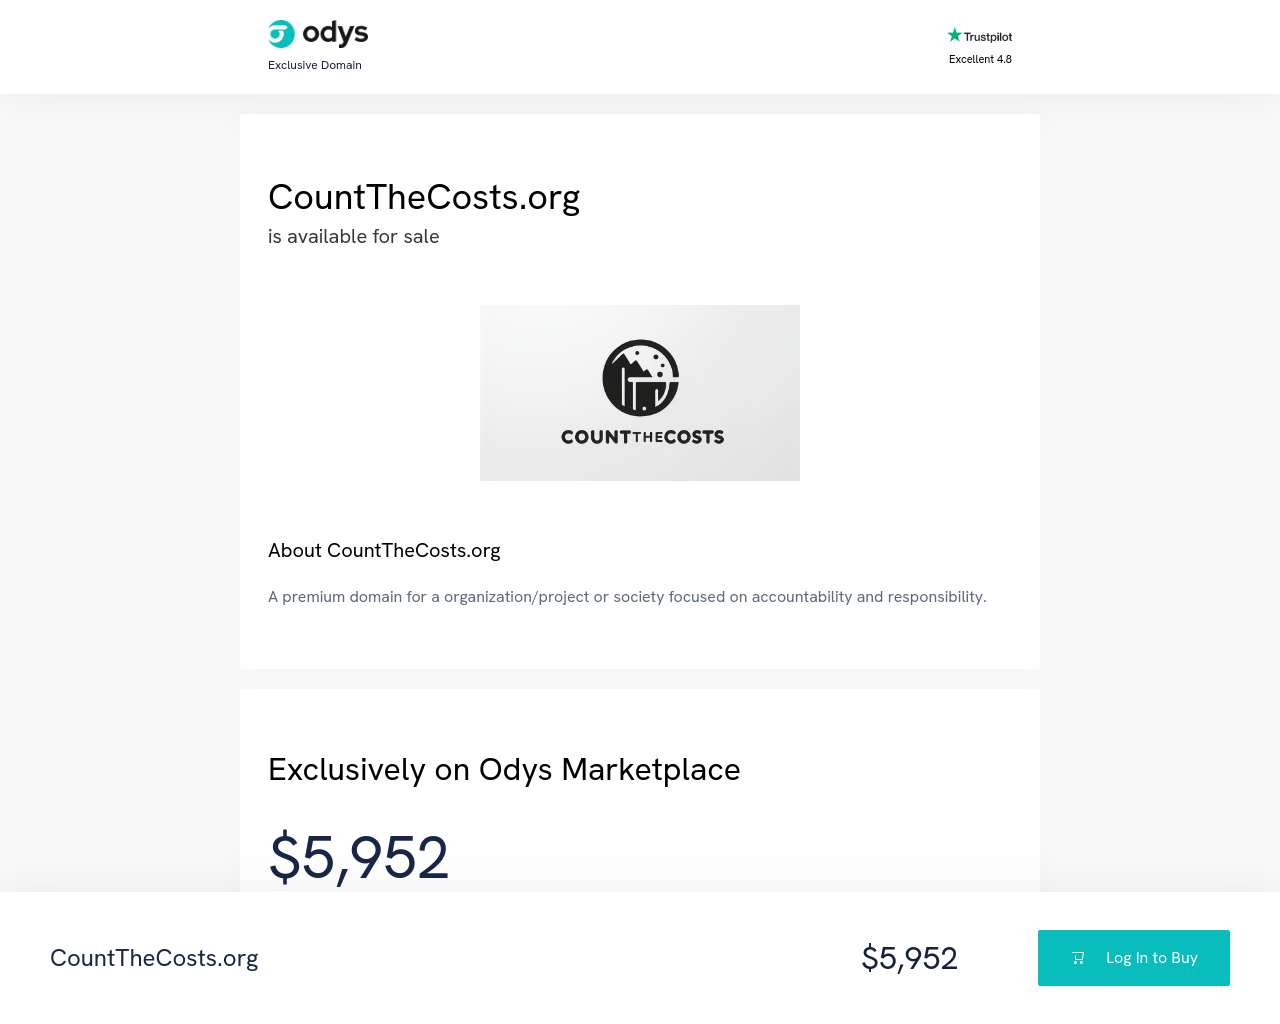 countthecosts.org